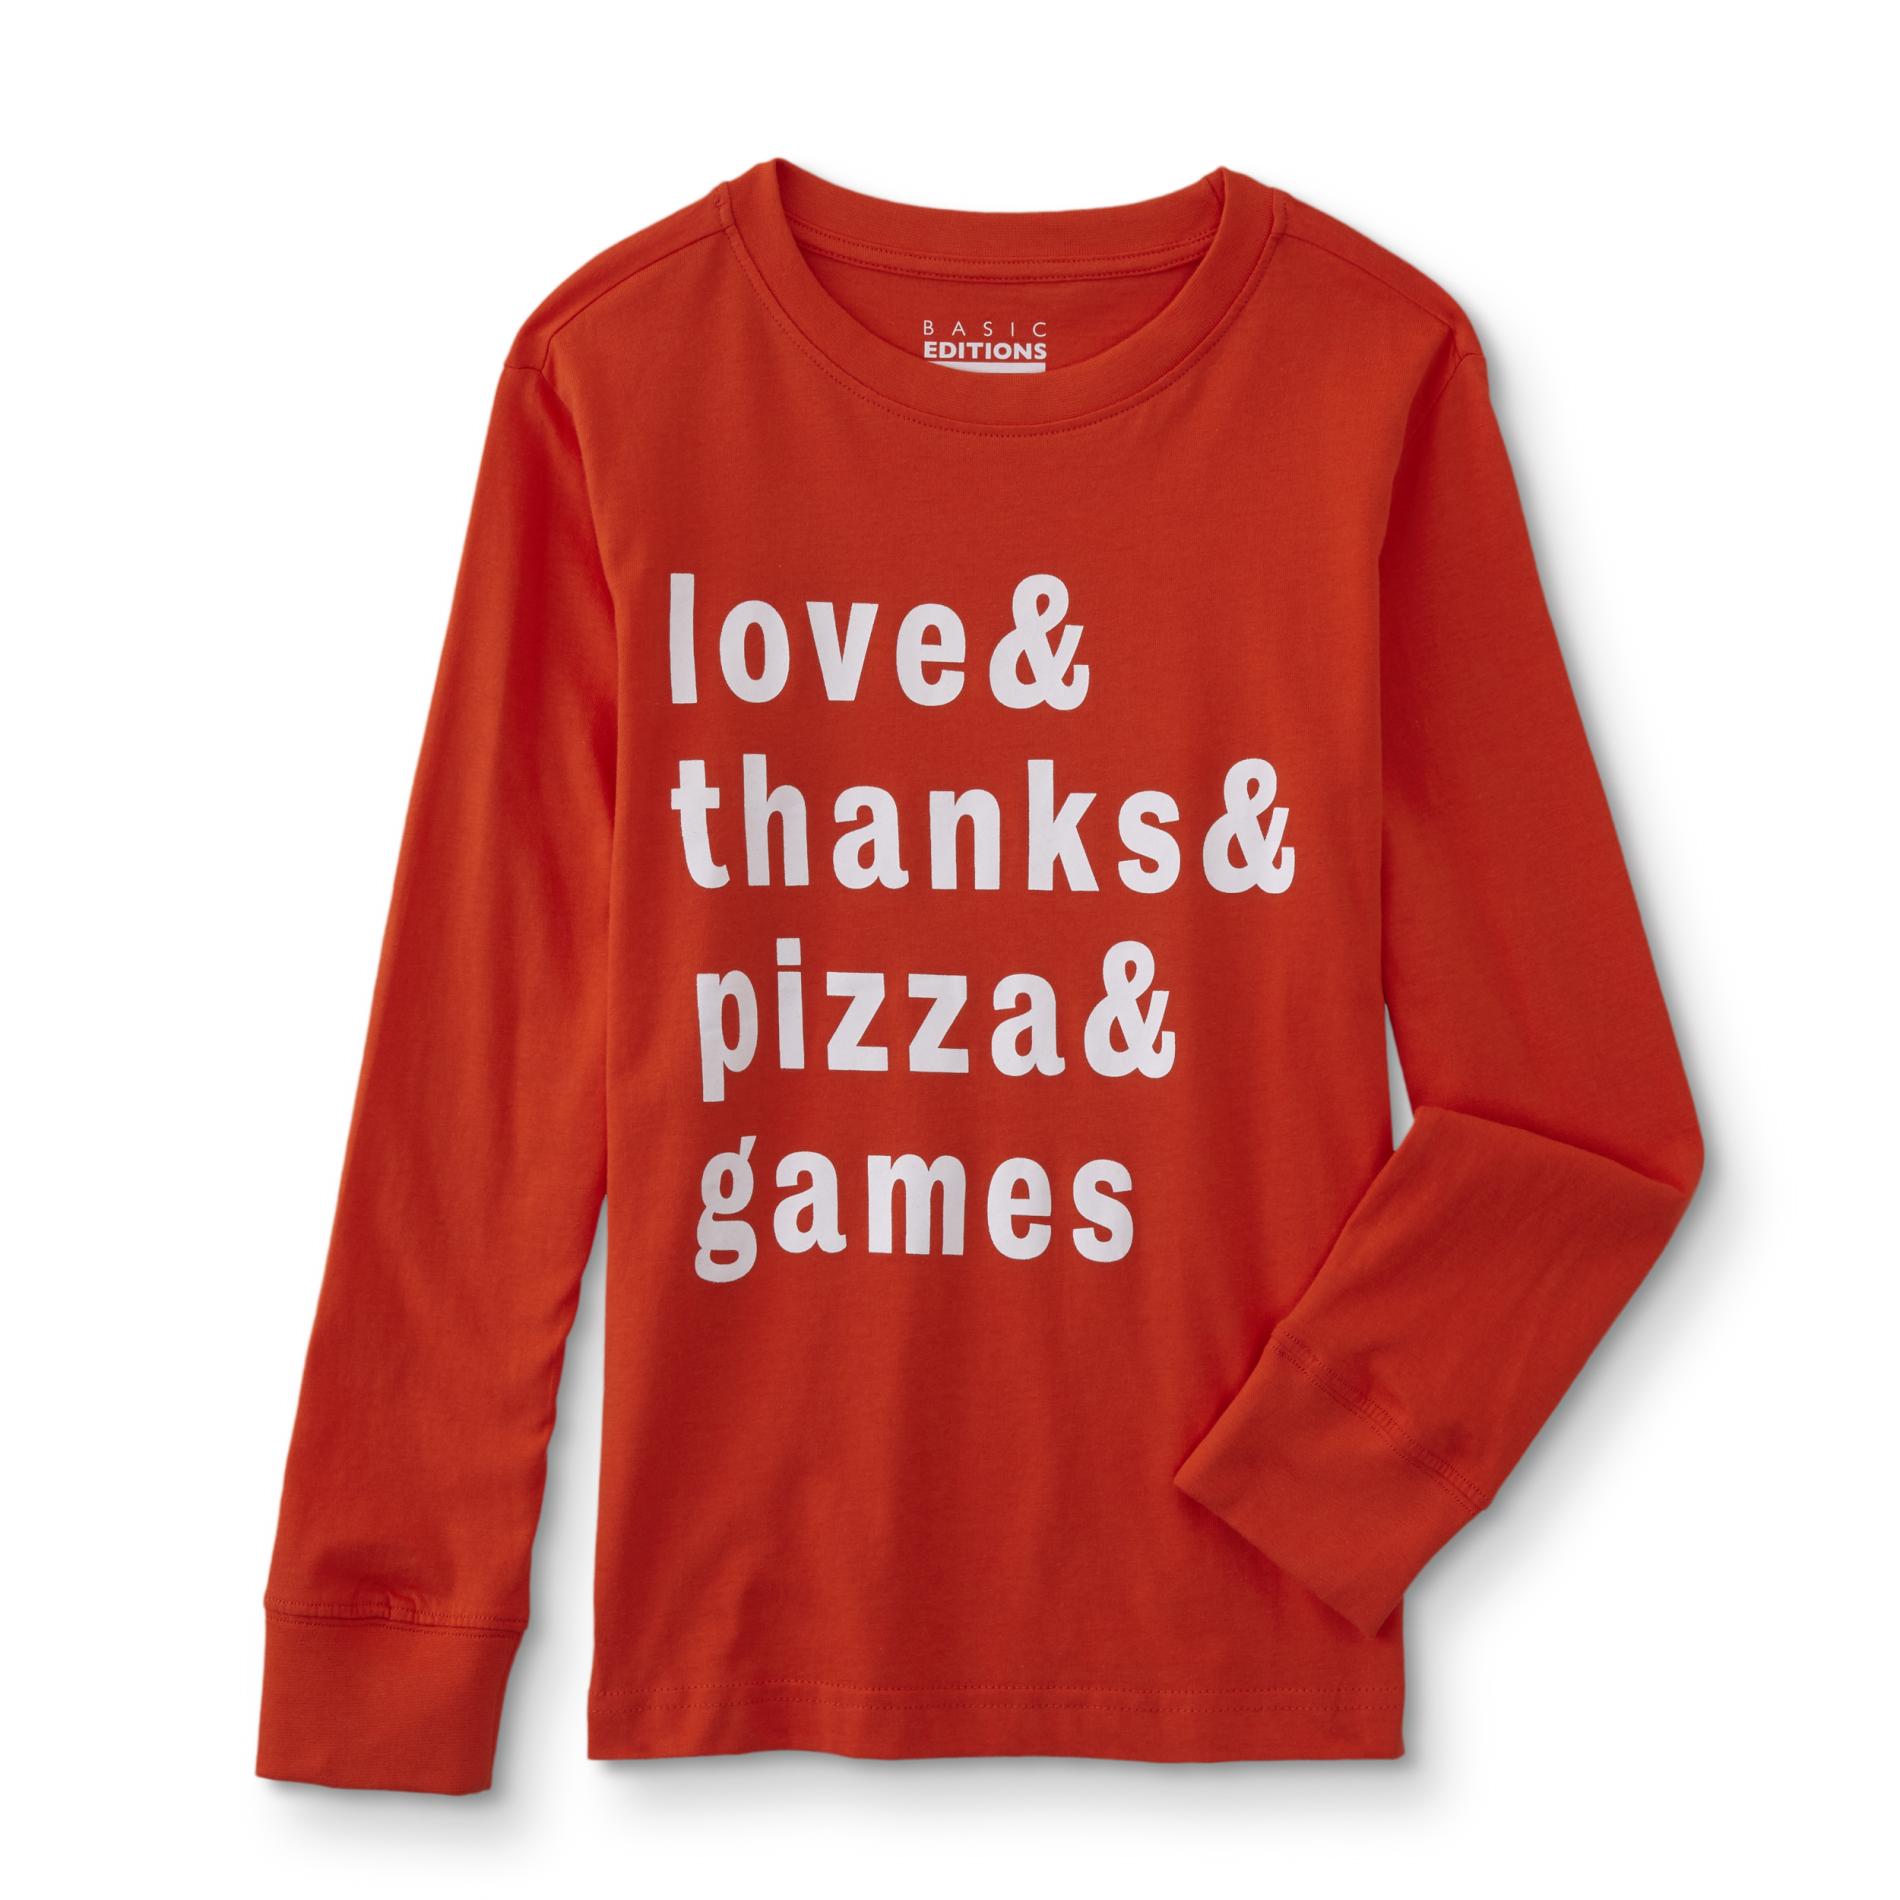 Simply Styled Boys' Long-Sleeve T-Shirt - Pizza Thanks